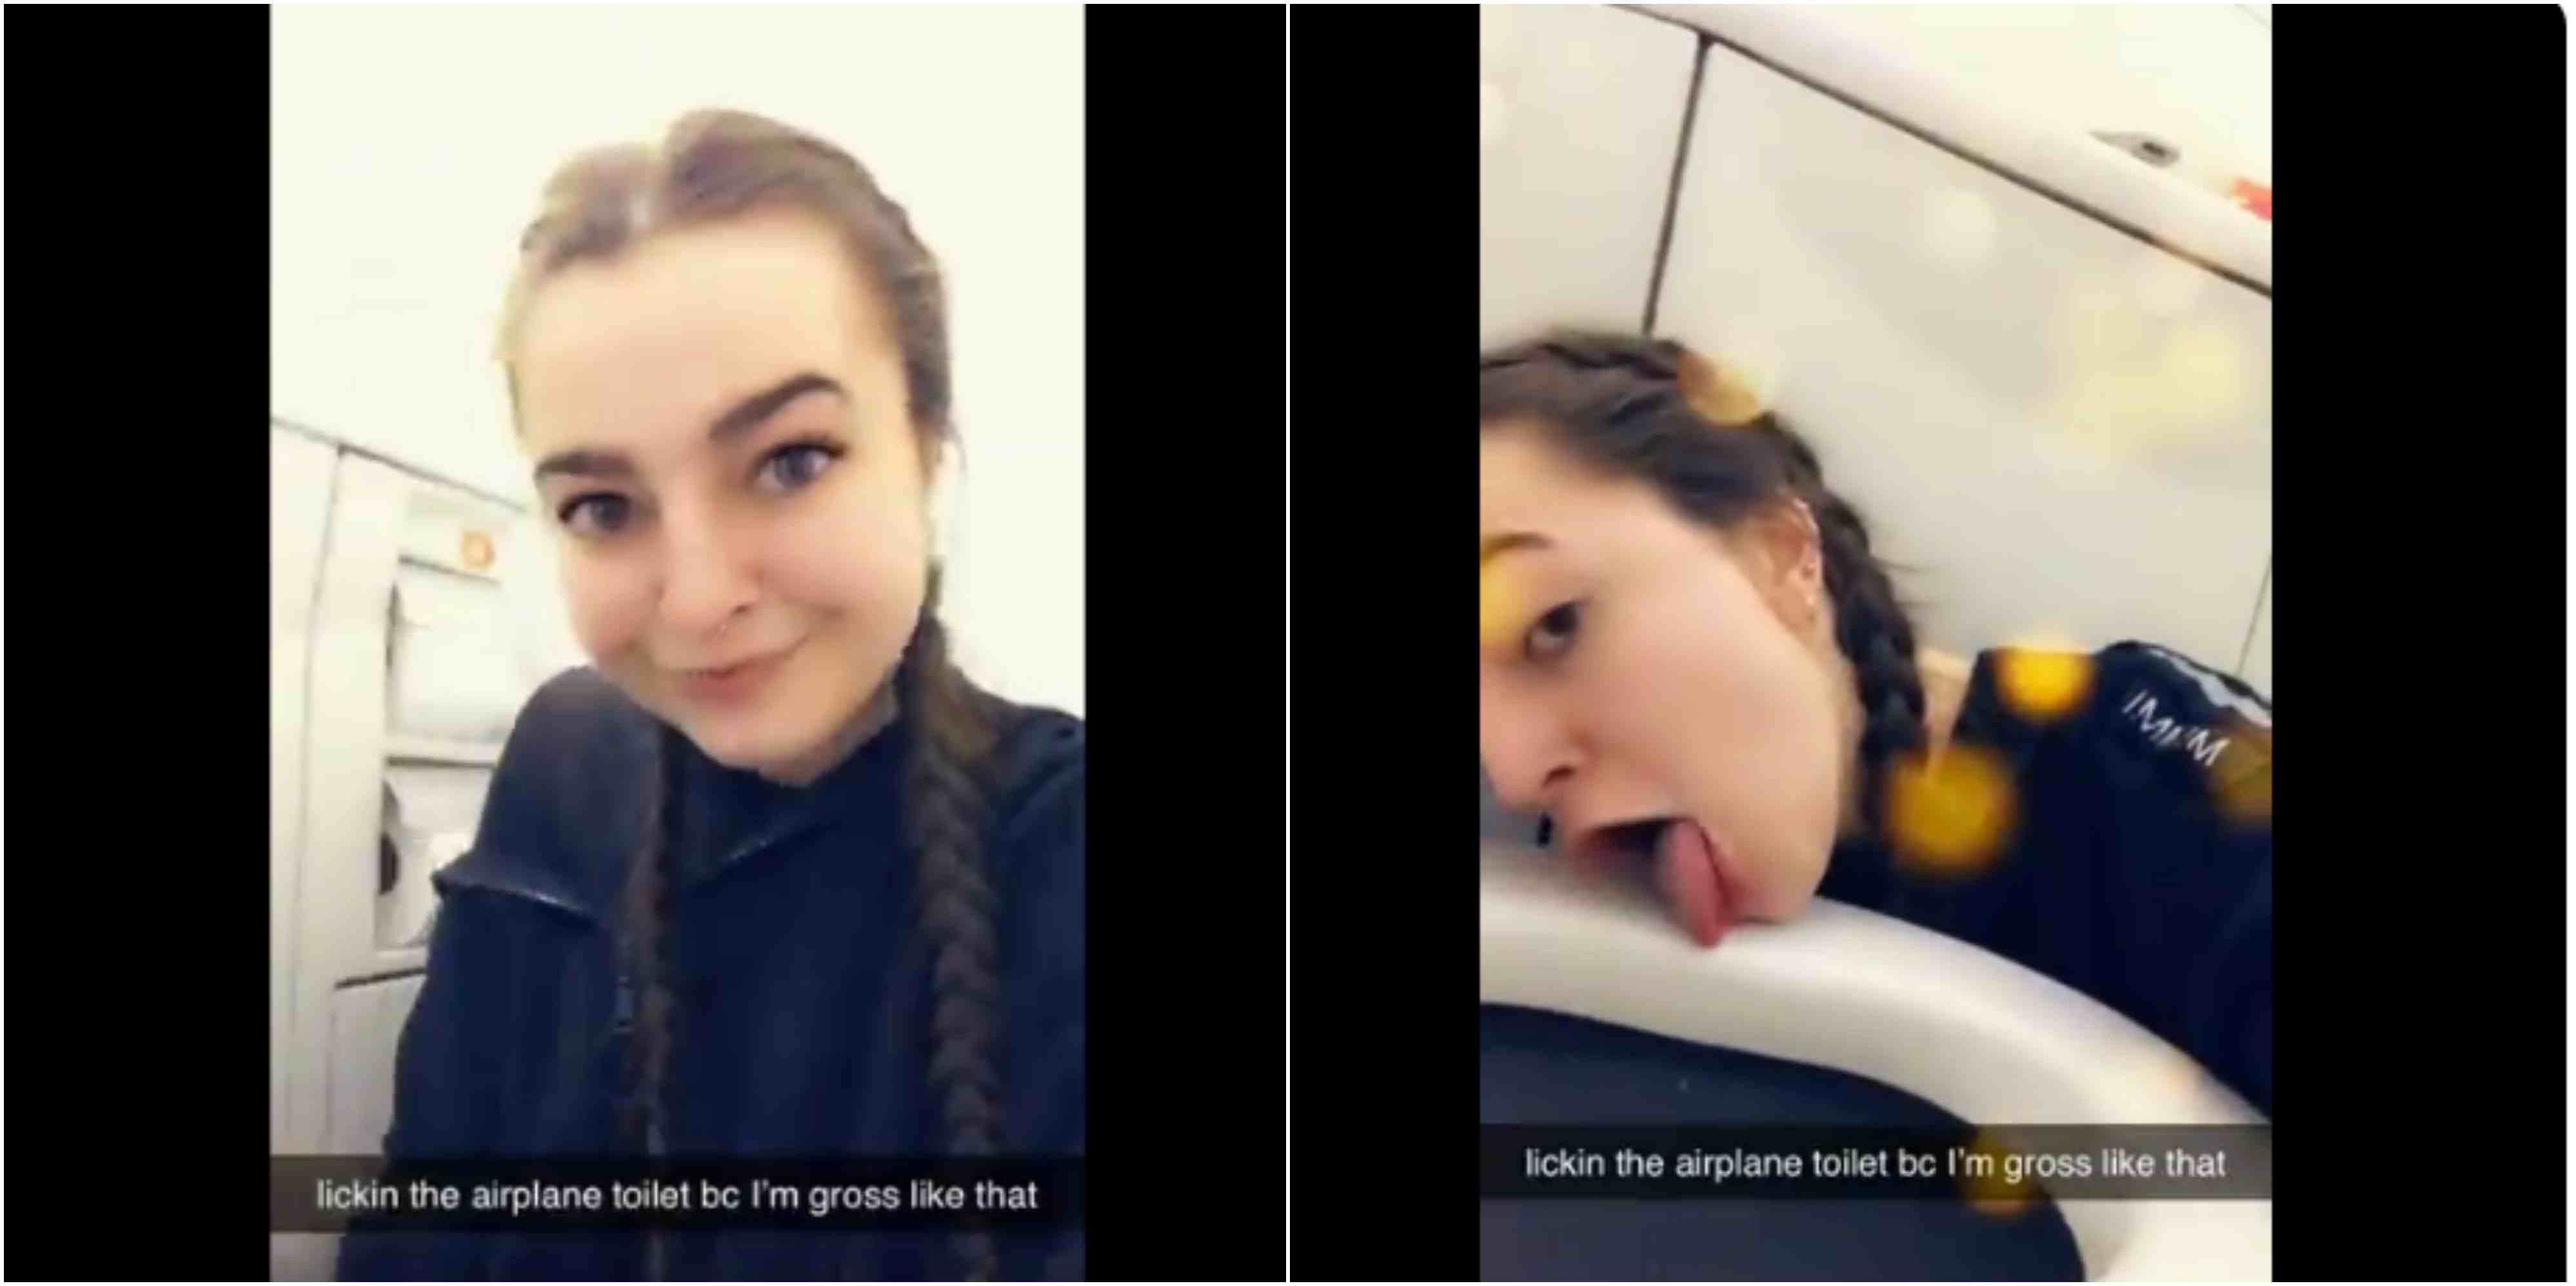 Video Of Lady Licking Airplane Toilet Goes Viral On Twitter Crime Nigeria